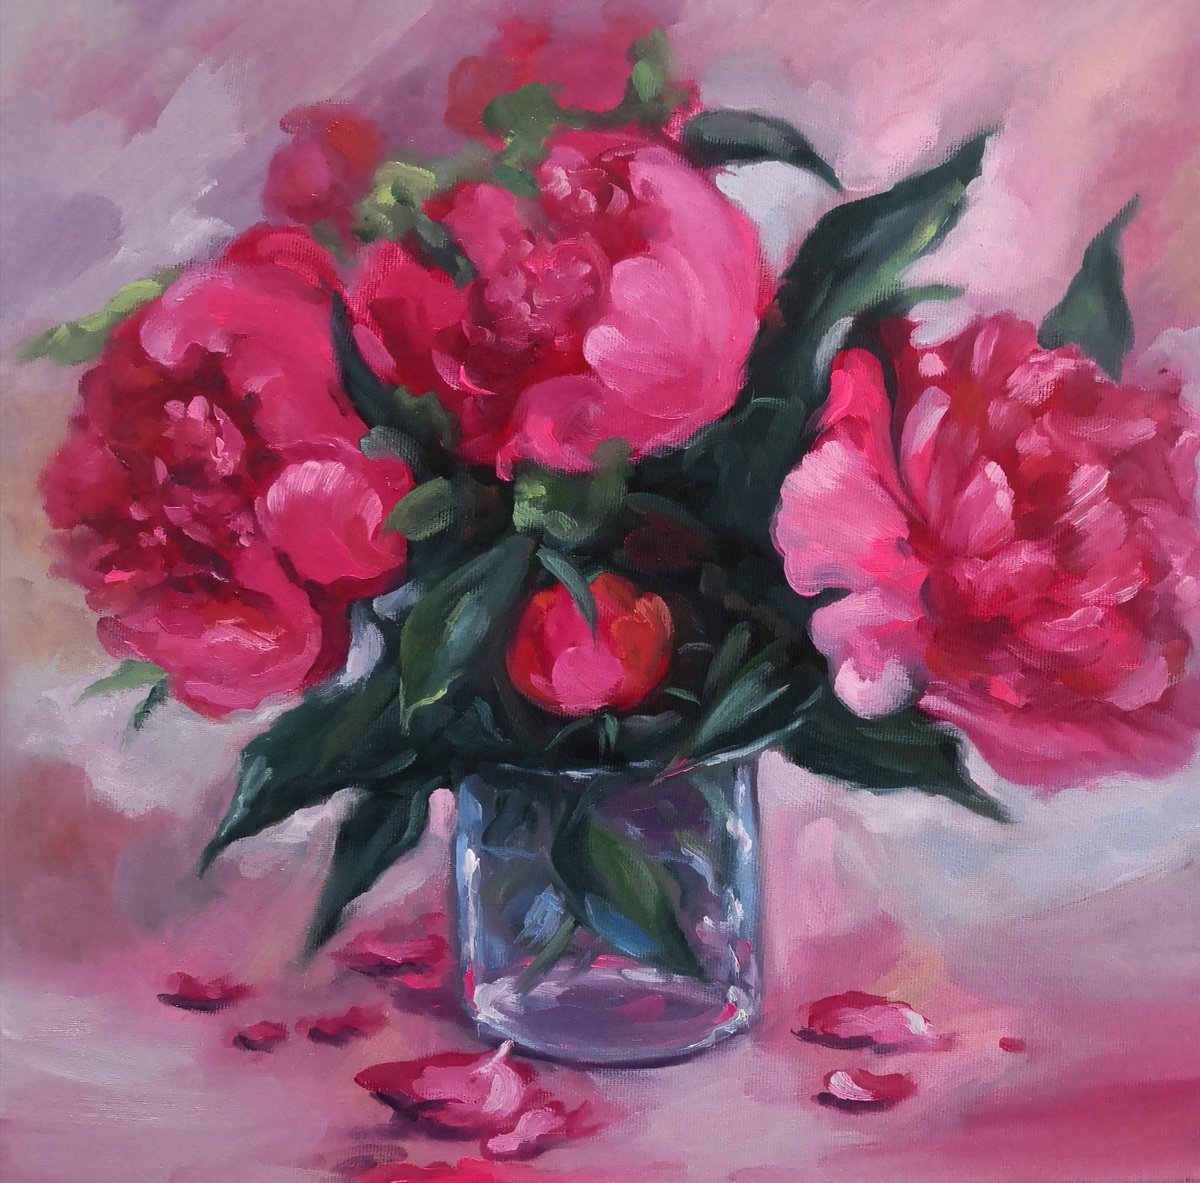 Pink Peonies in a glass still life by Jane Lantsman